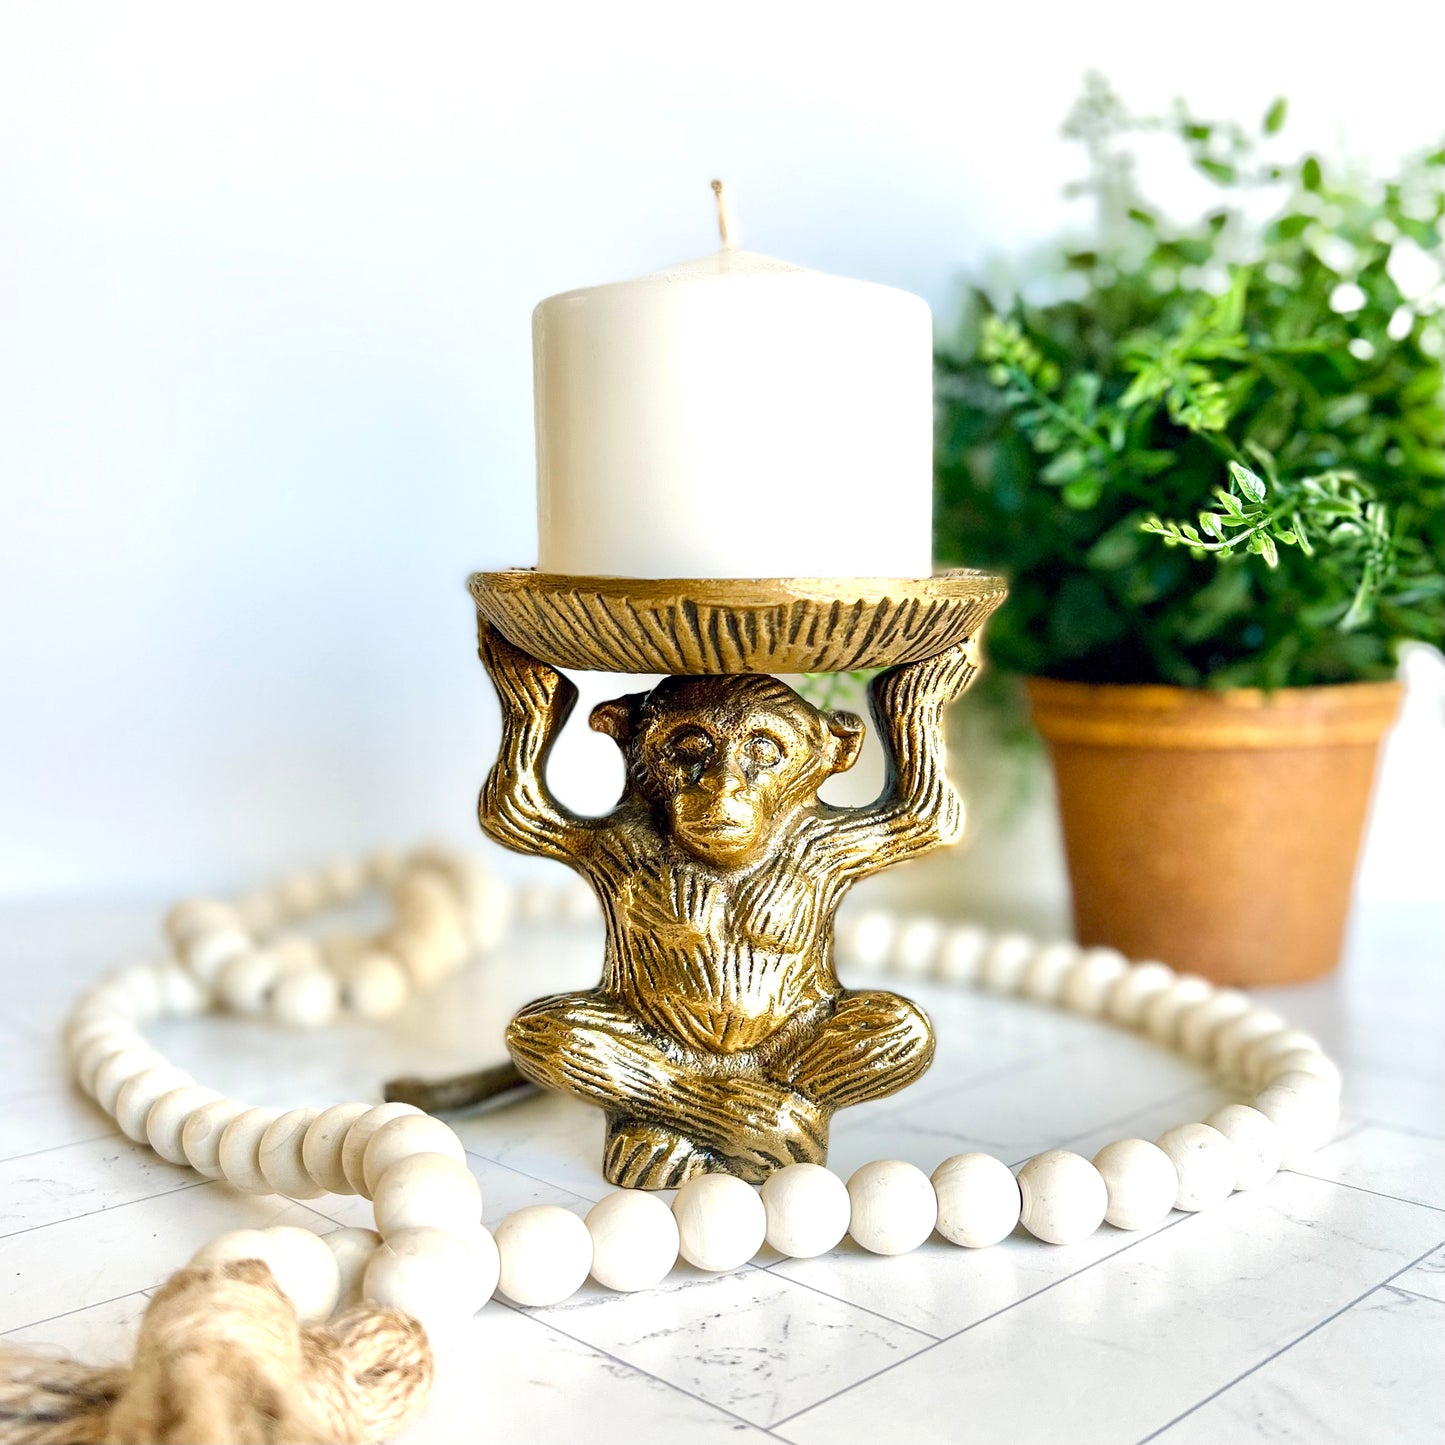 The brass monkey figurine shown with other decorative items on a table